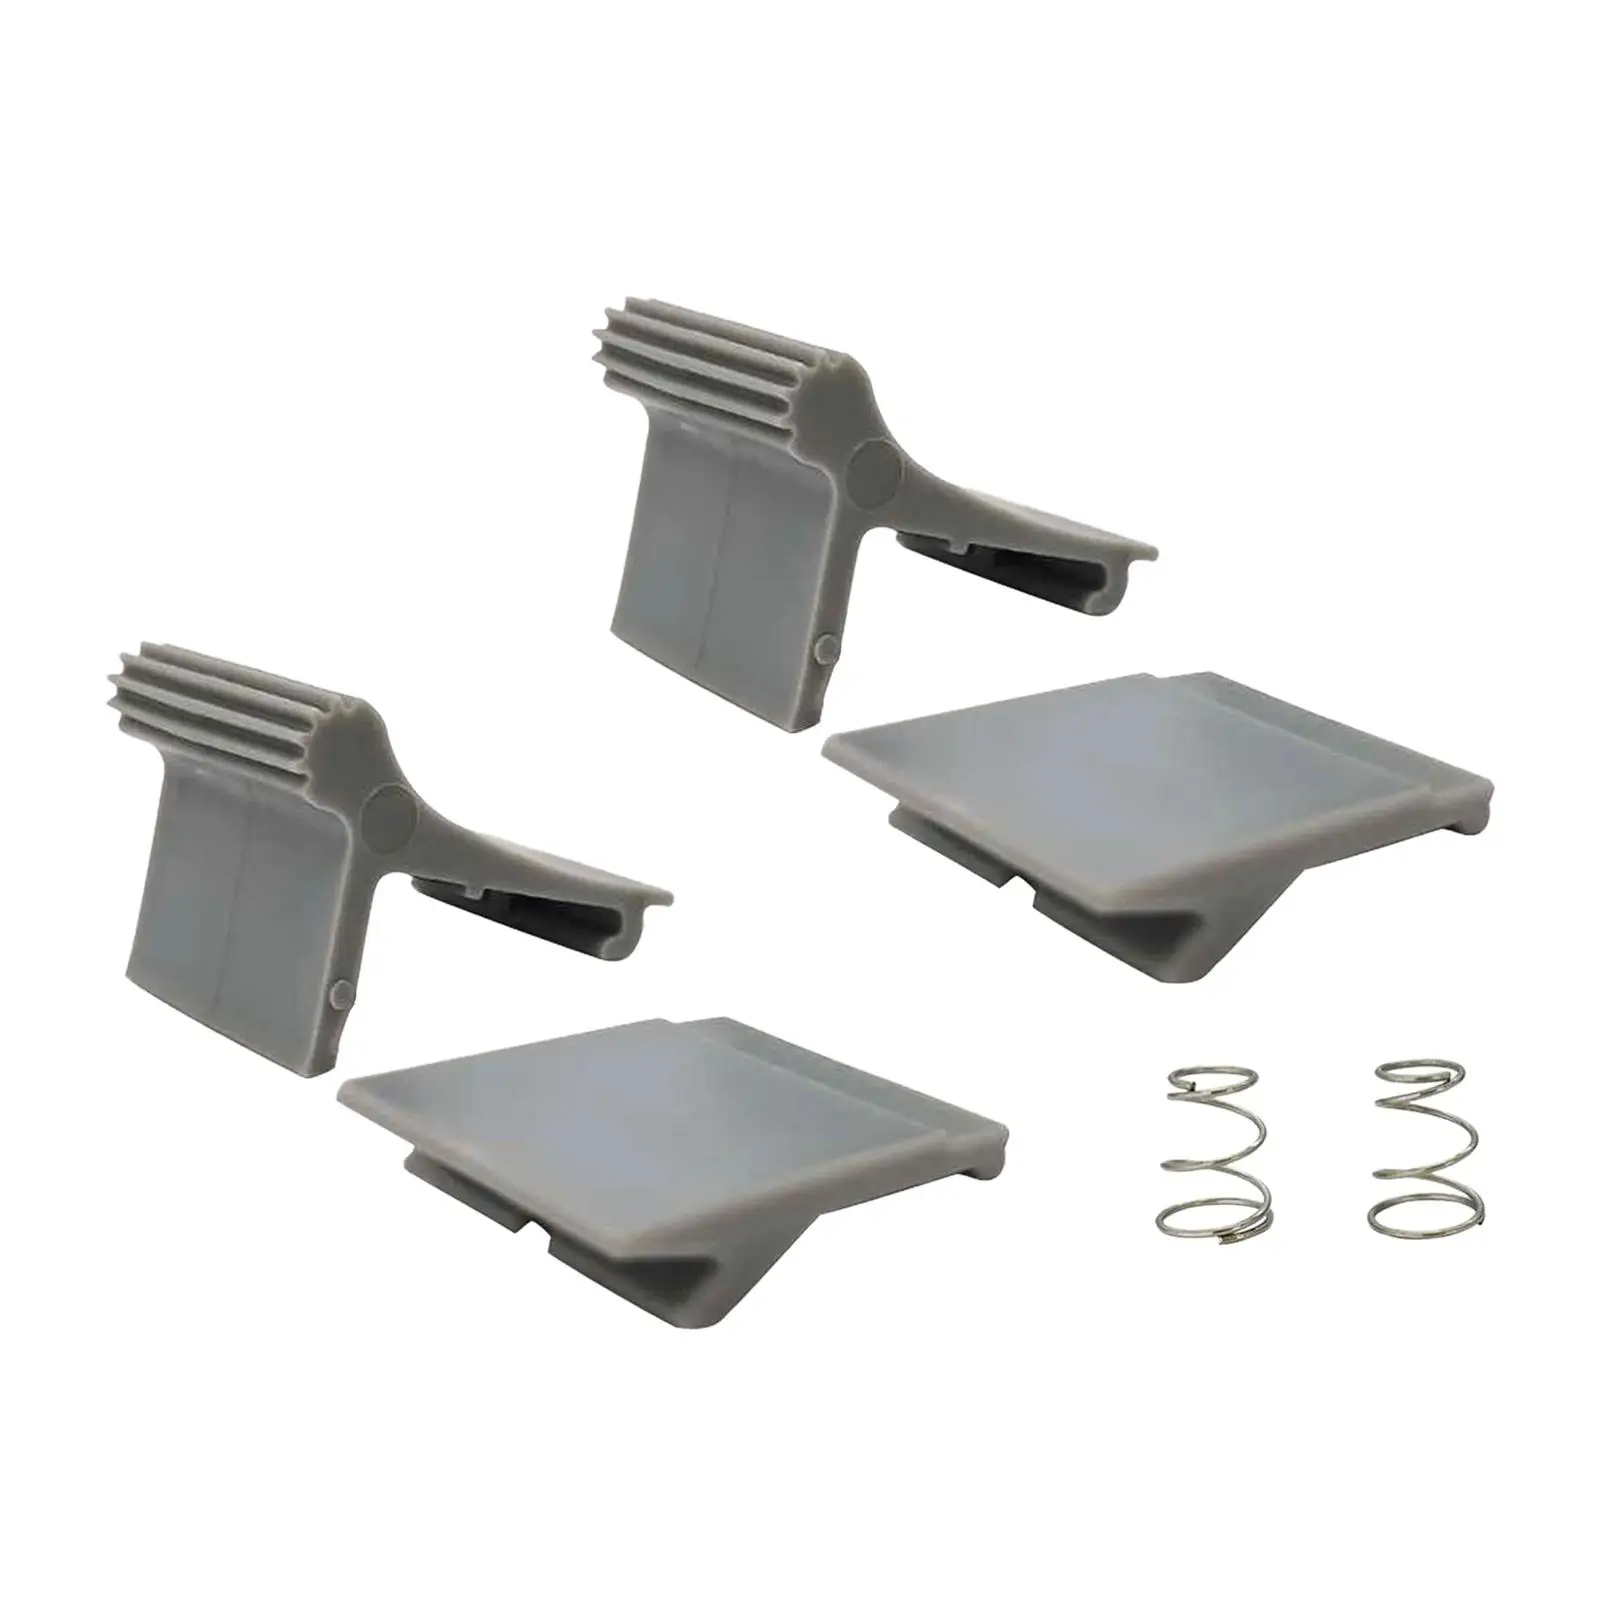 RV Awning Arm Slider Catch Set ,Easy to Install, 4 Slider Catch, Repair Parts,